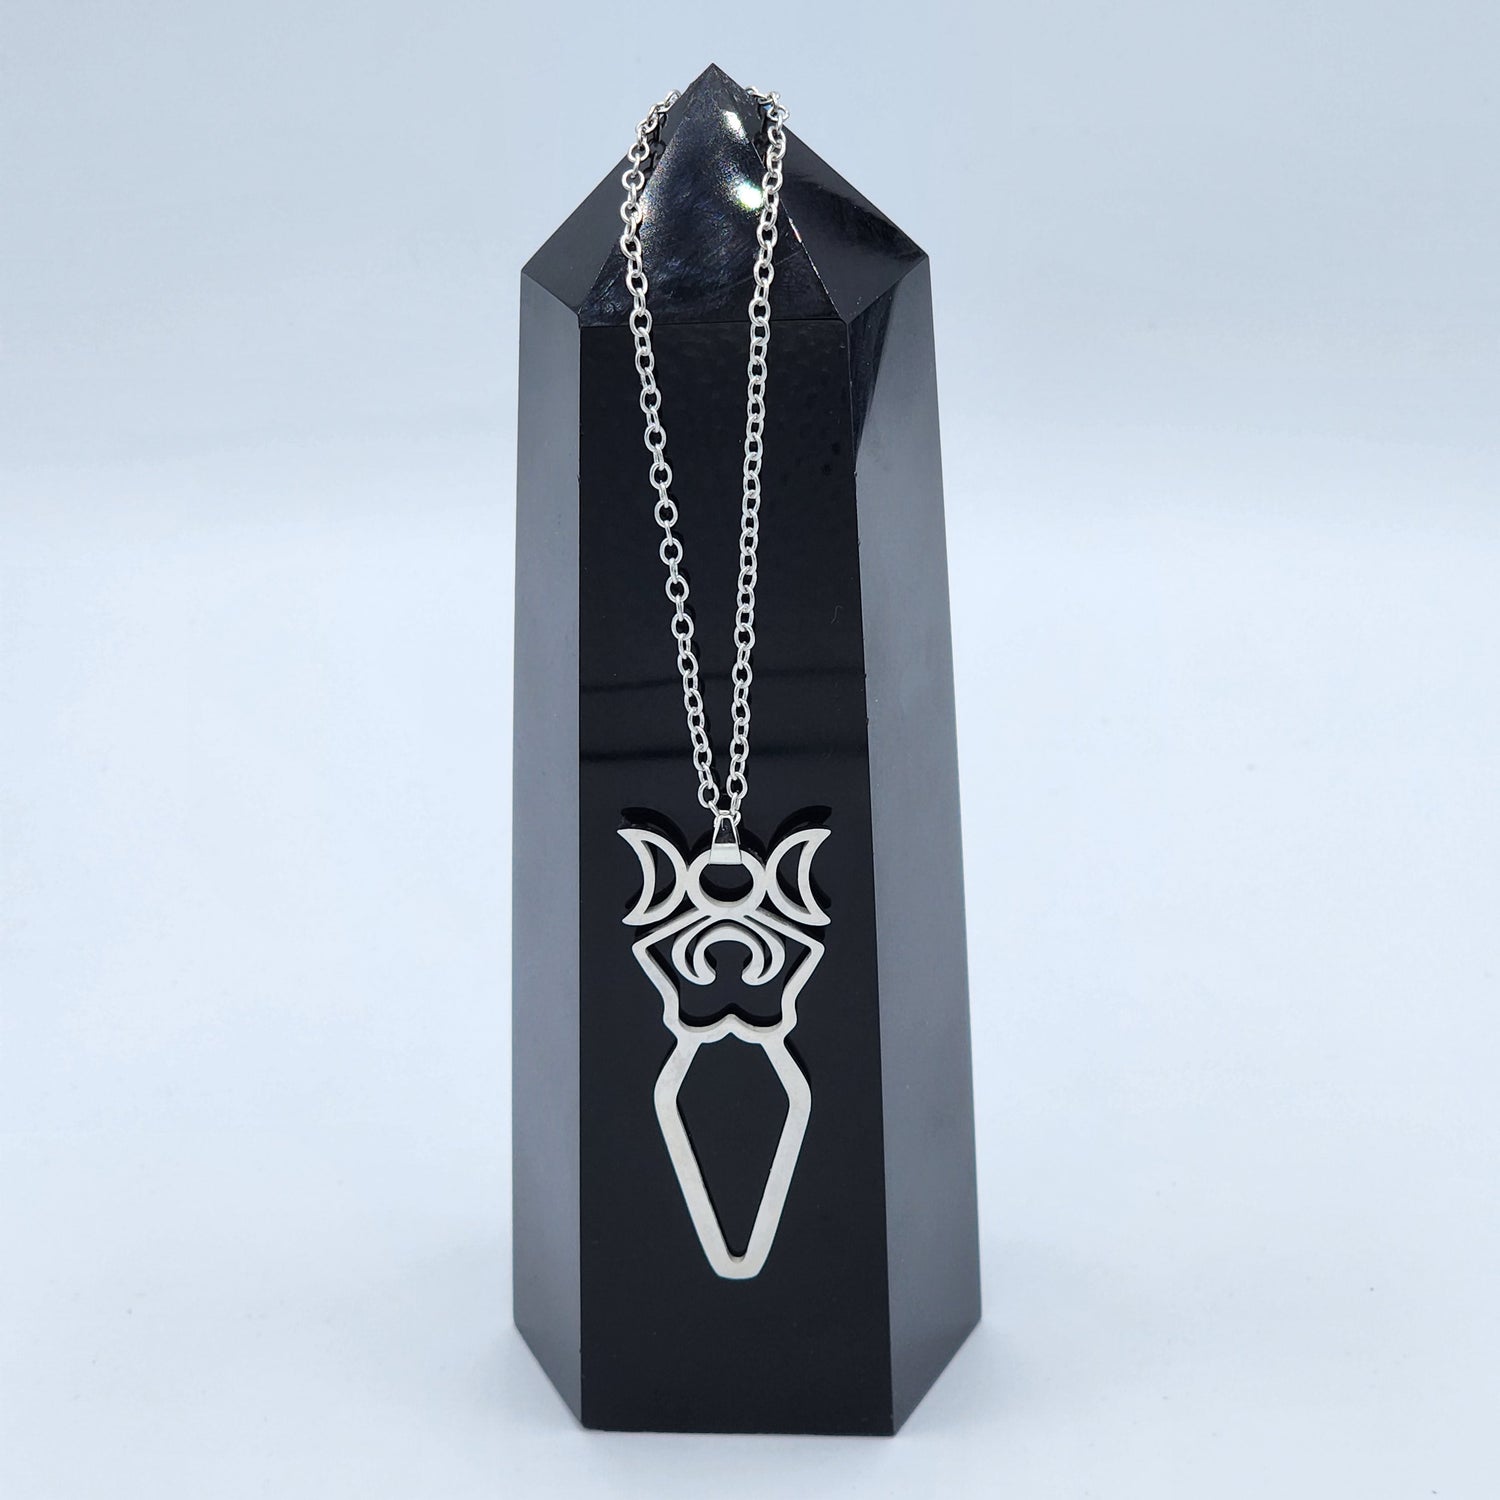 Pendants & Necklaces: Embrace Elegance and Individuality with Healing Crystals